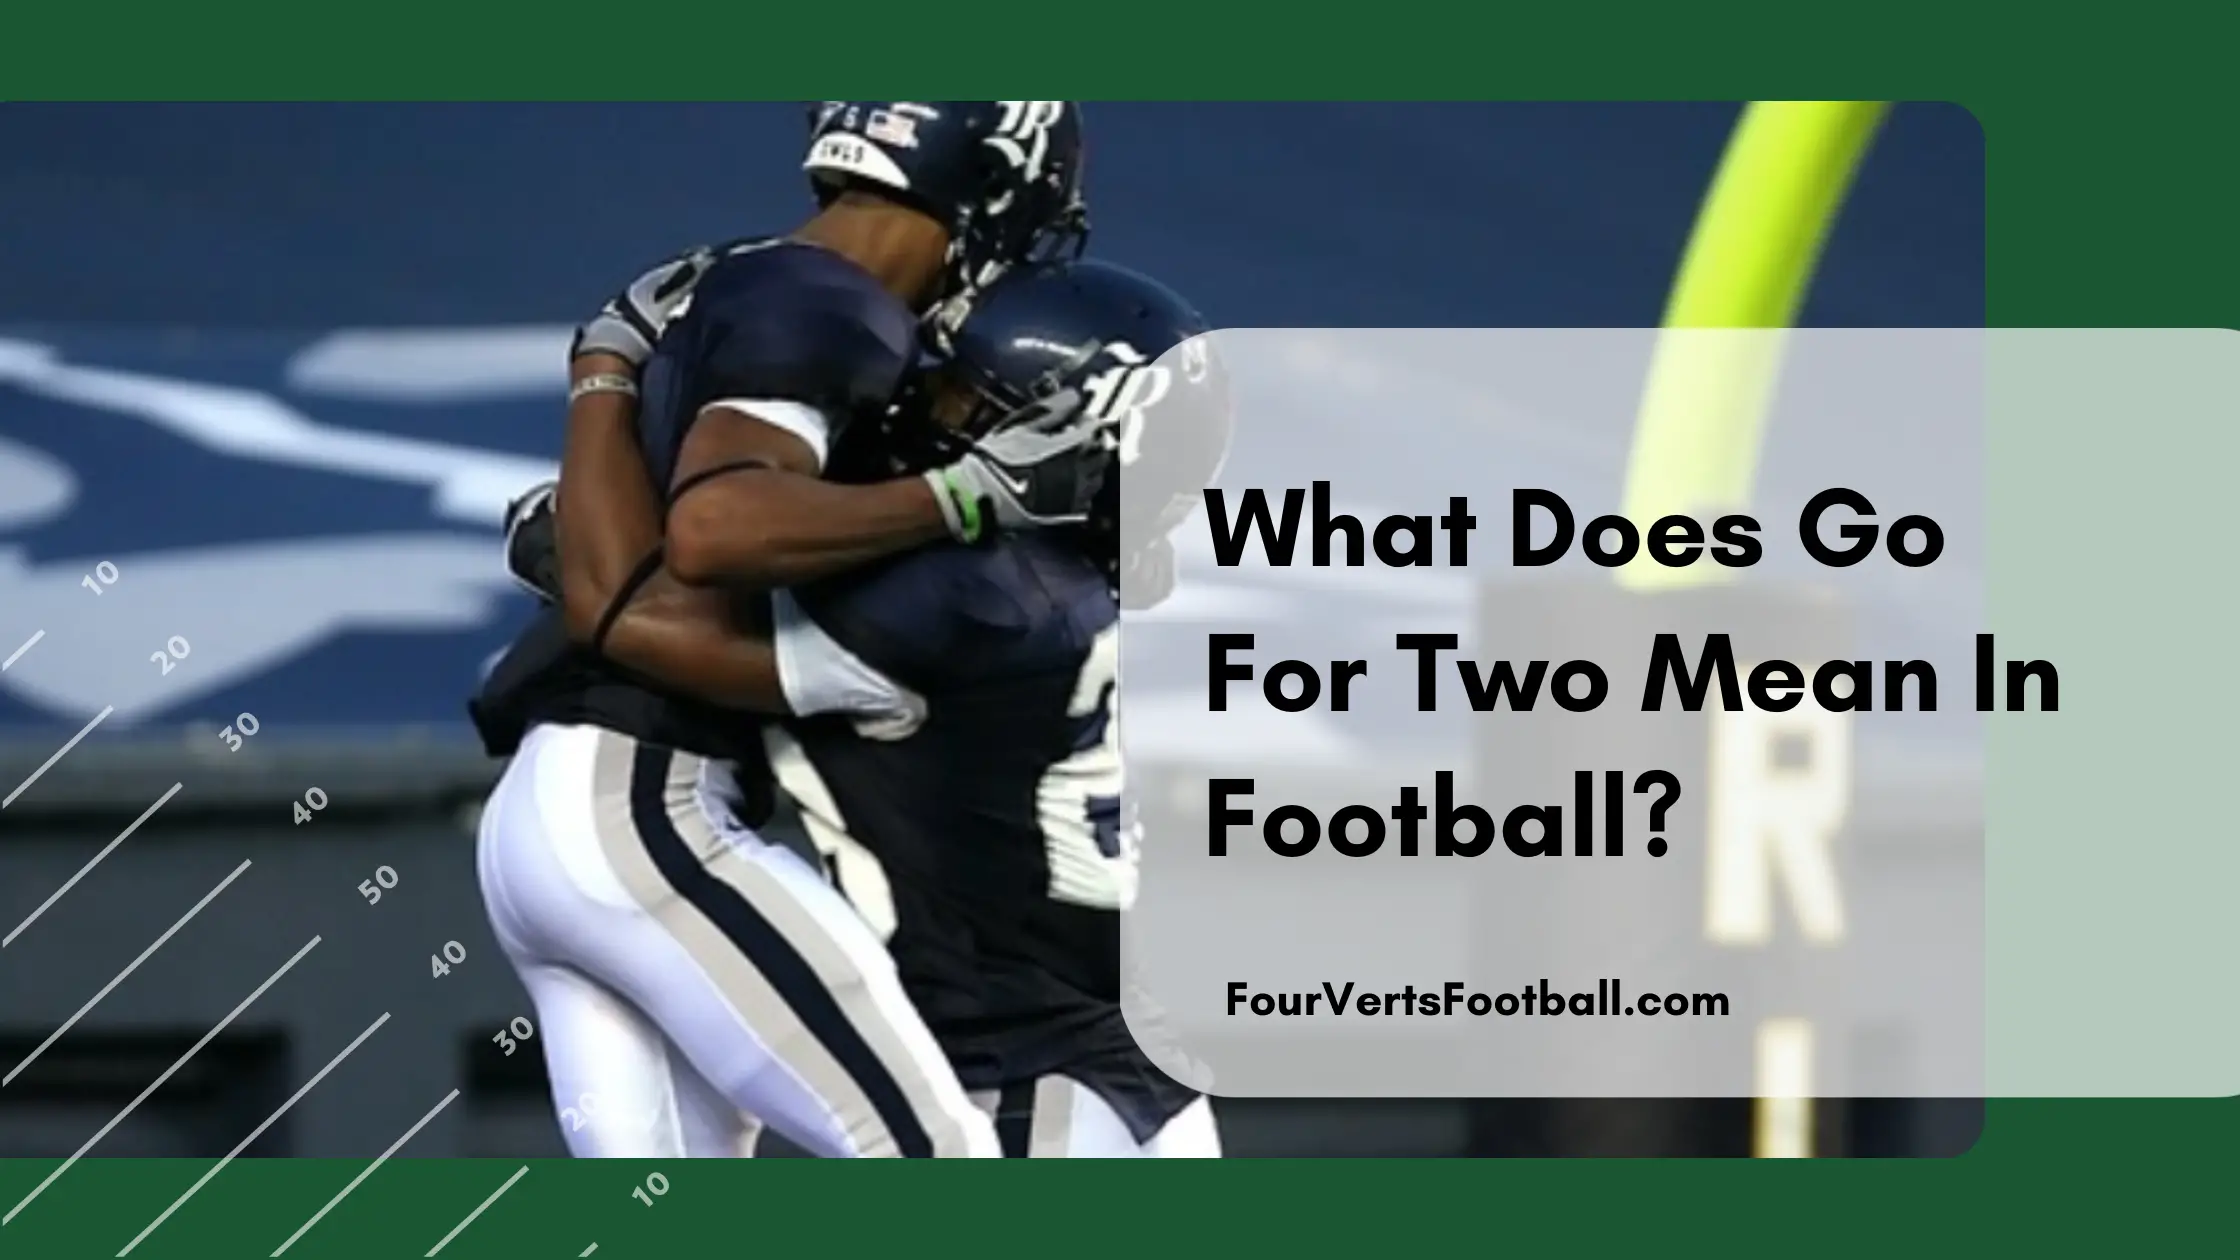 What Does It Mean To Go For Two In Football?